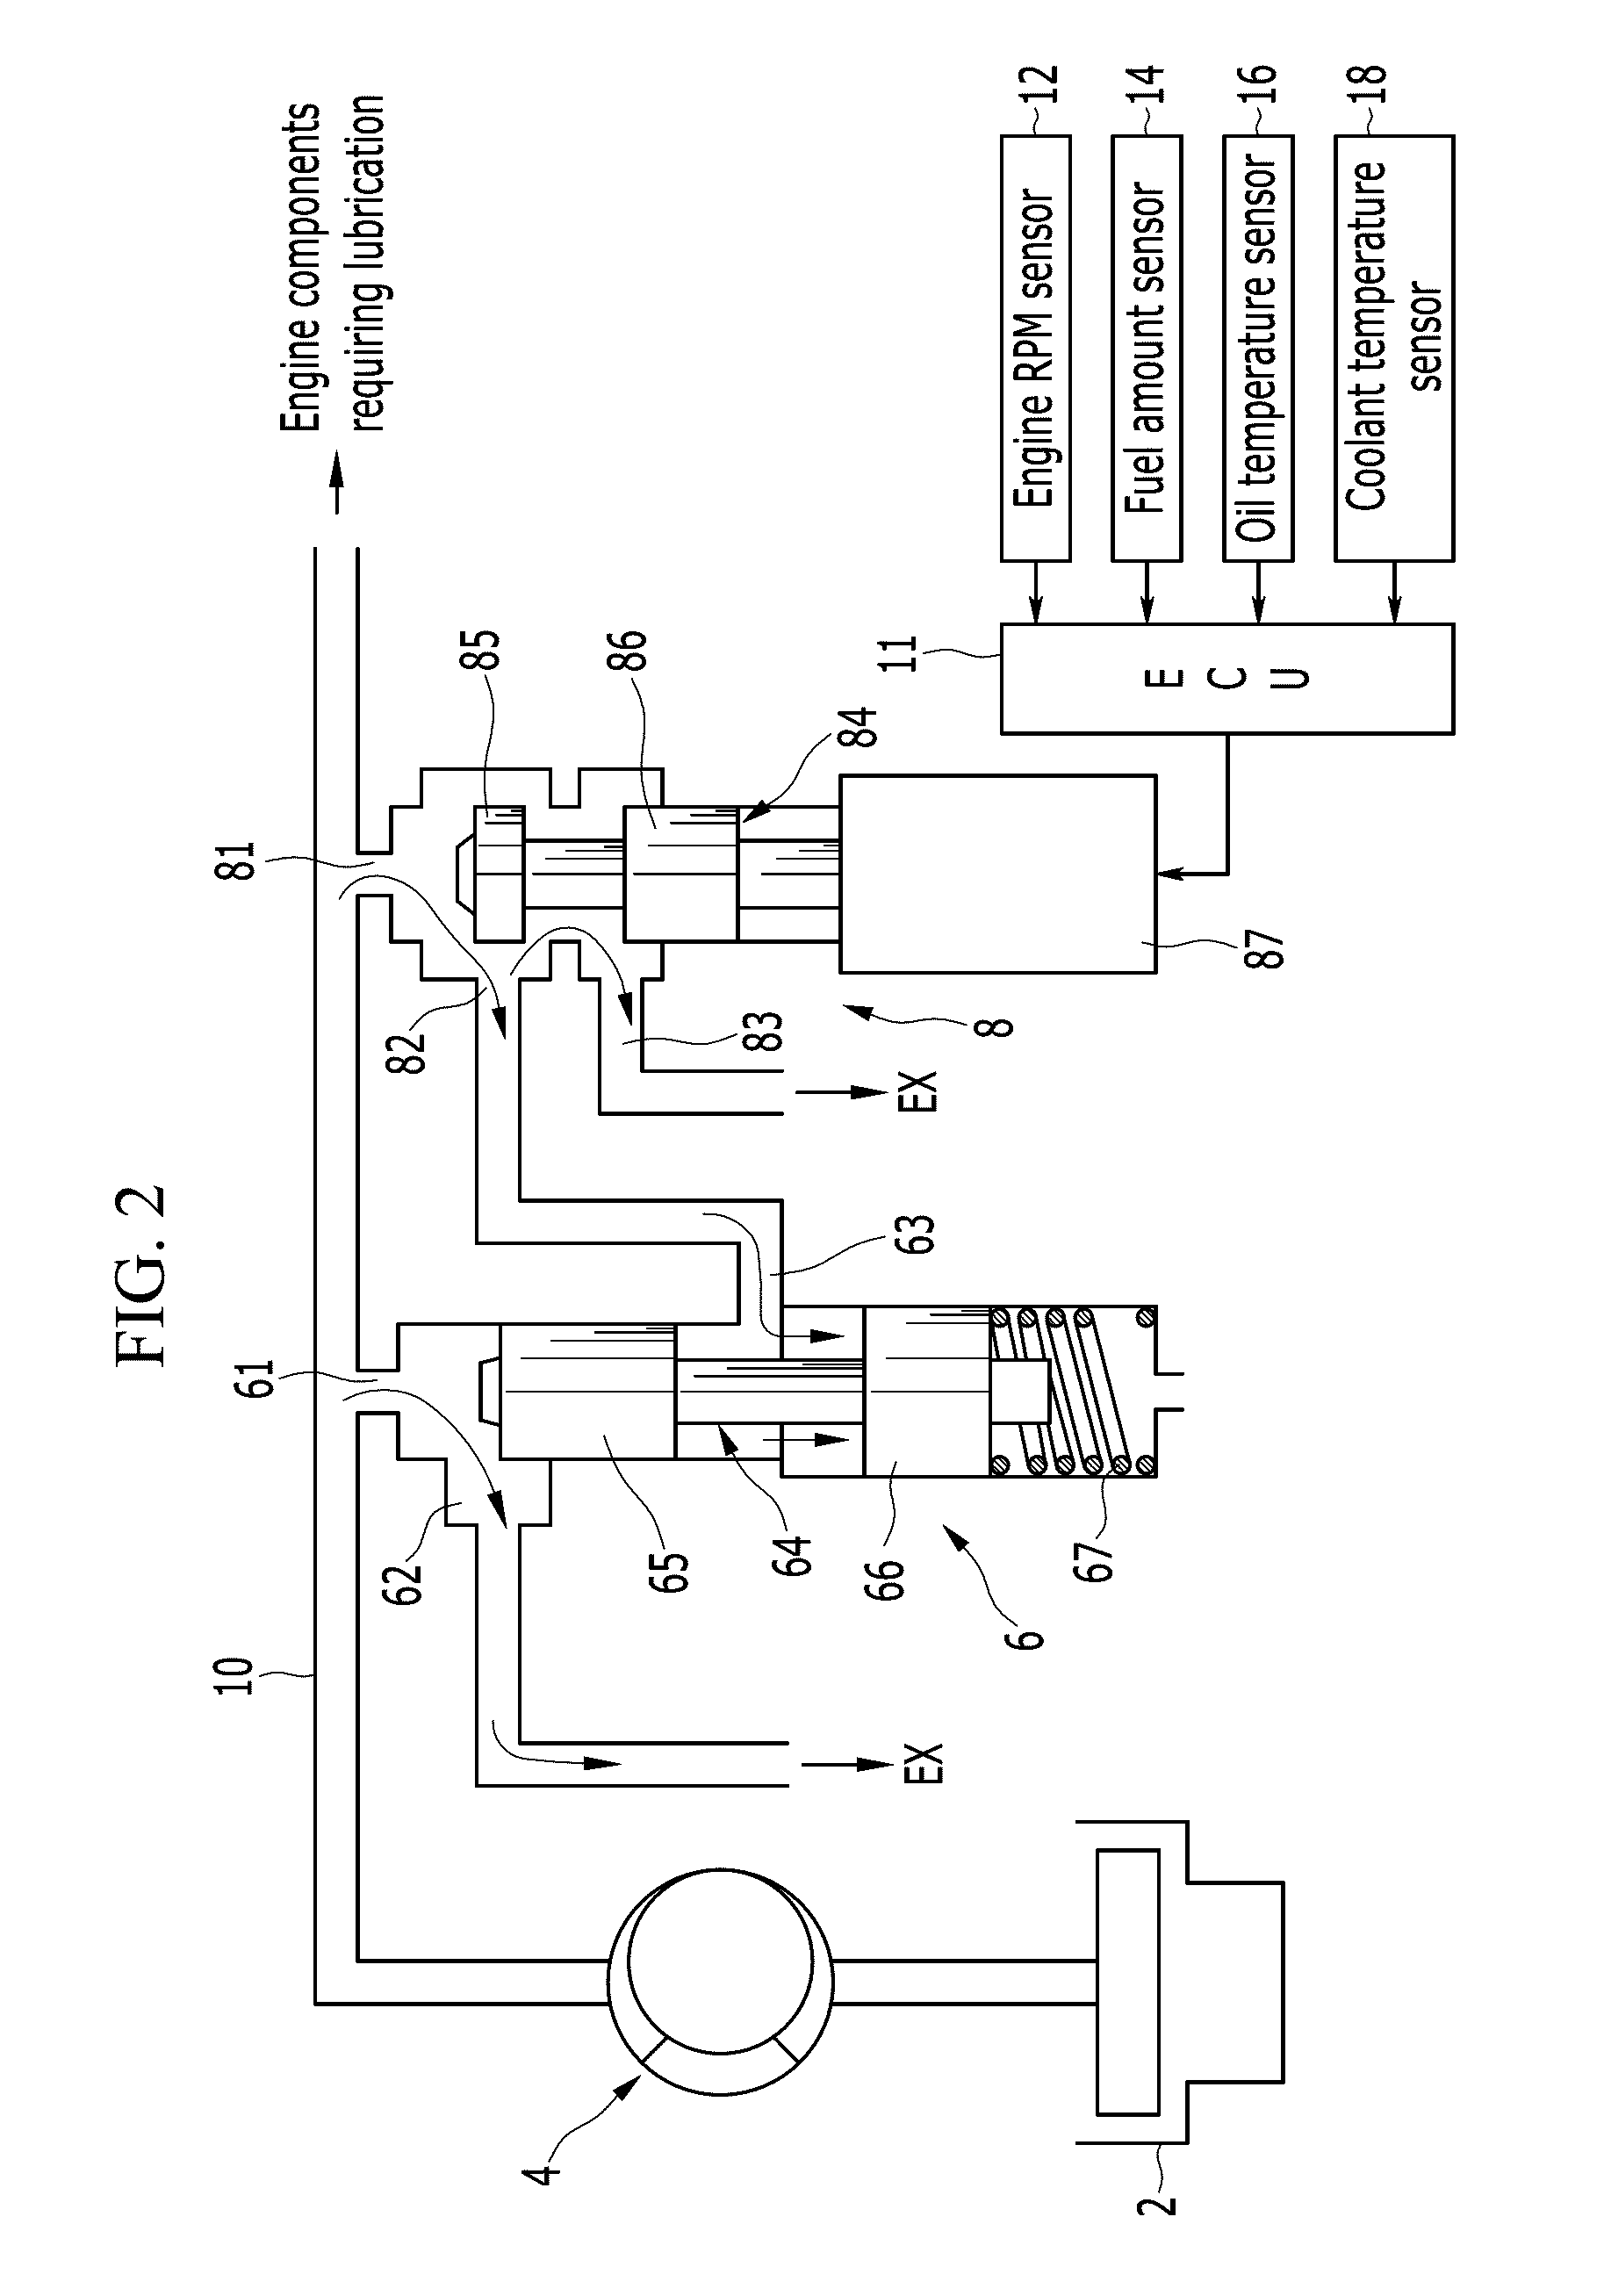 Oil pump system of an engine for a vehicle